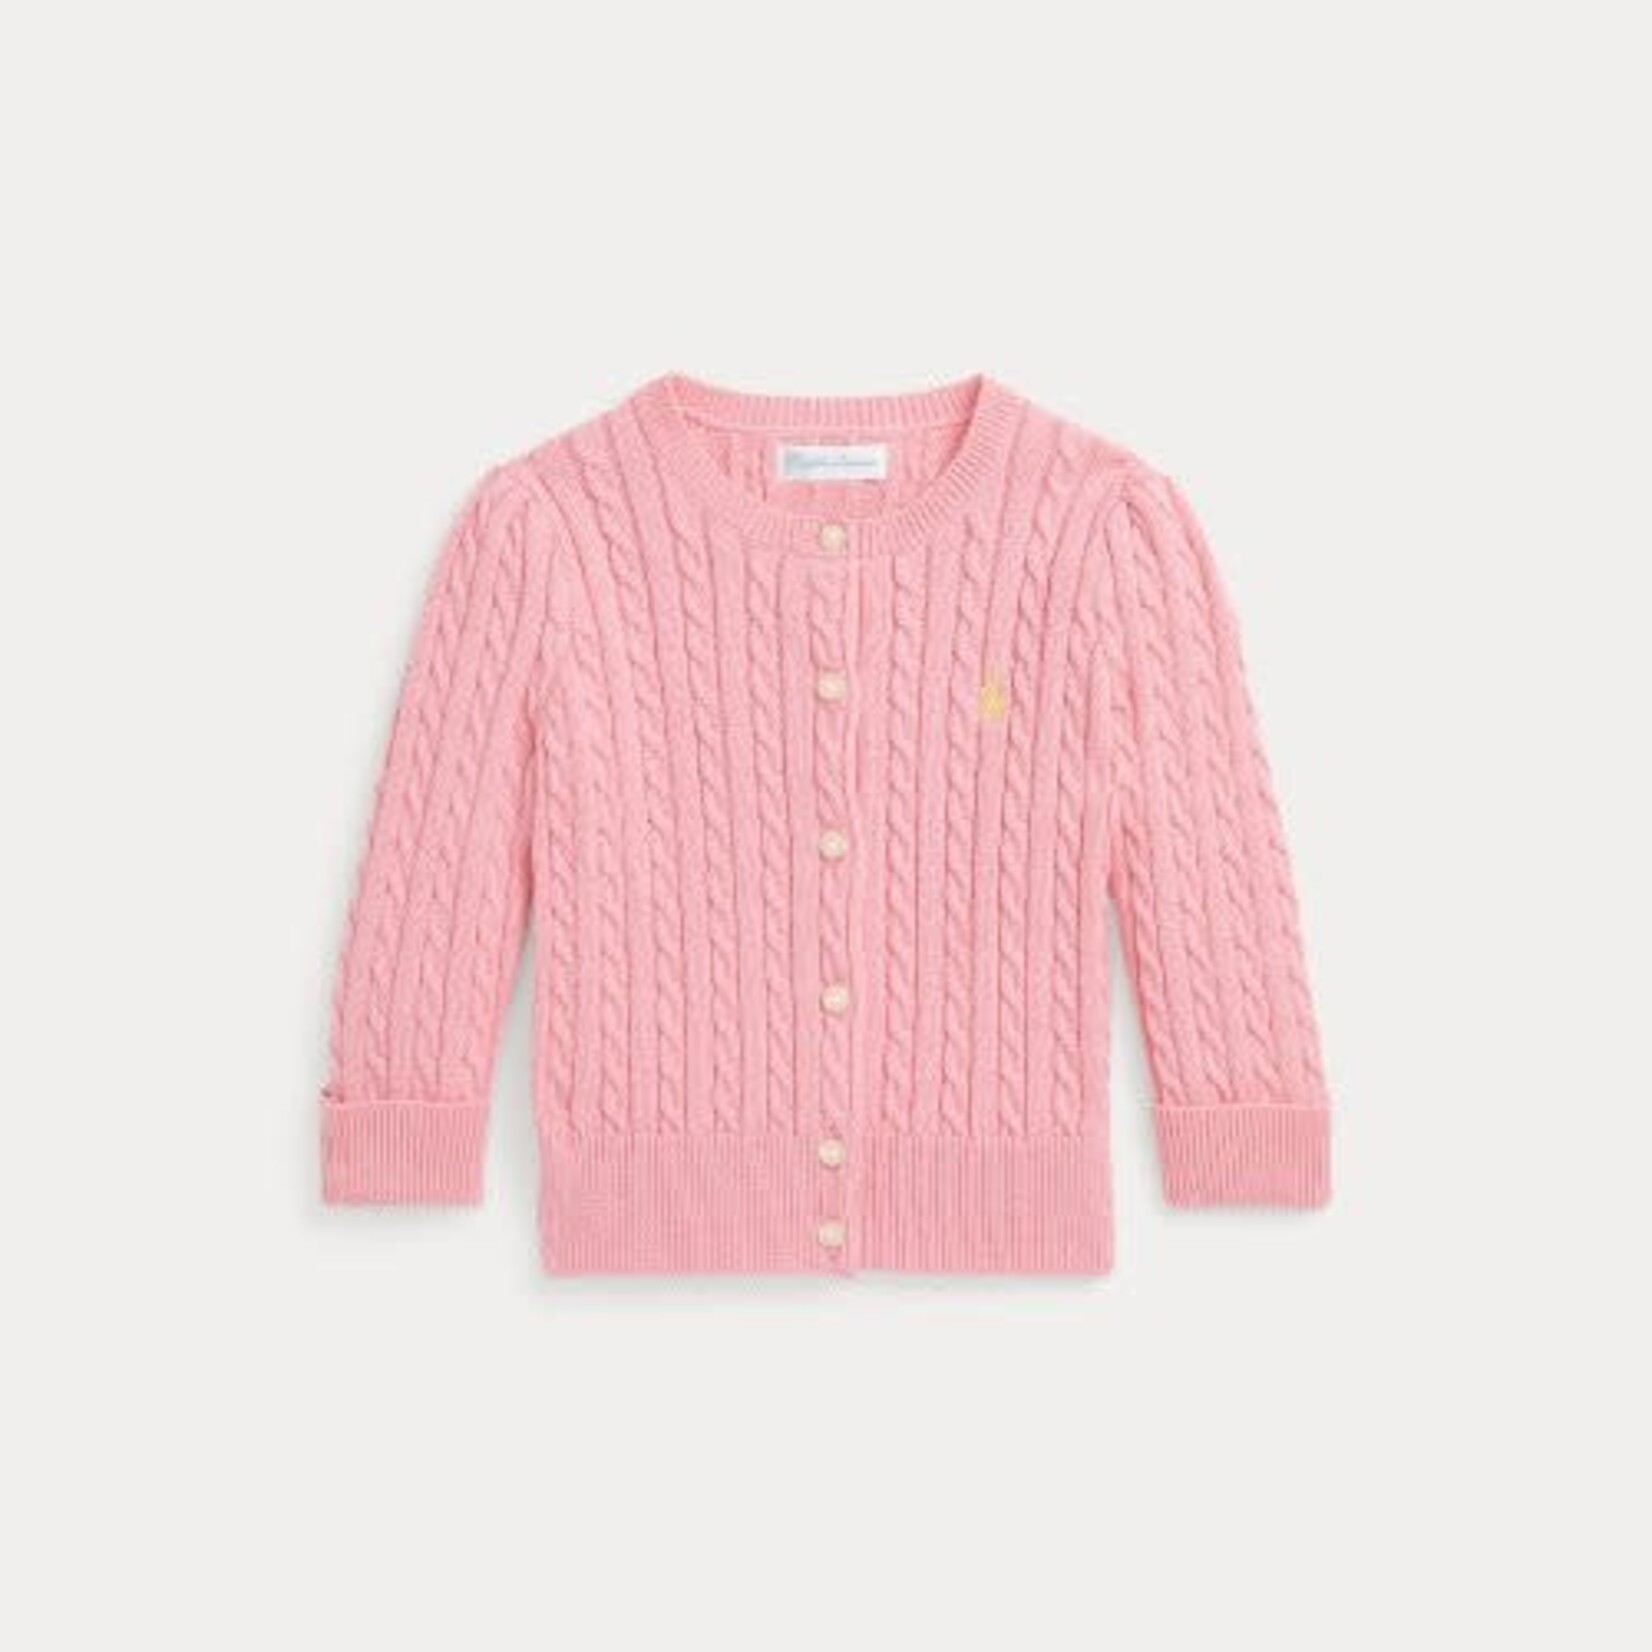 Ralph Lauren MINI CABLE-TOPS-SWEATER-FLORIDA PINK W/ OASIS YELLOW